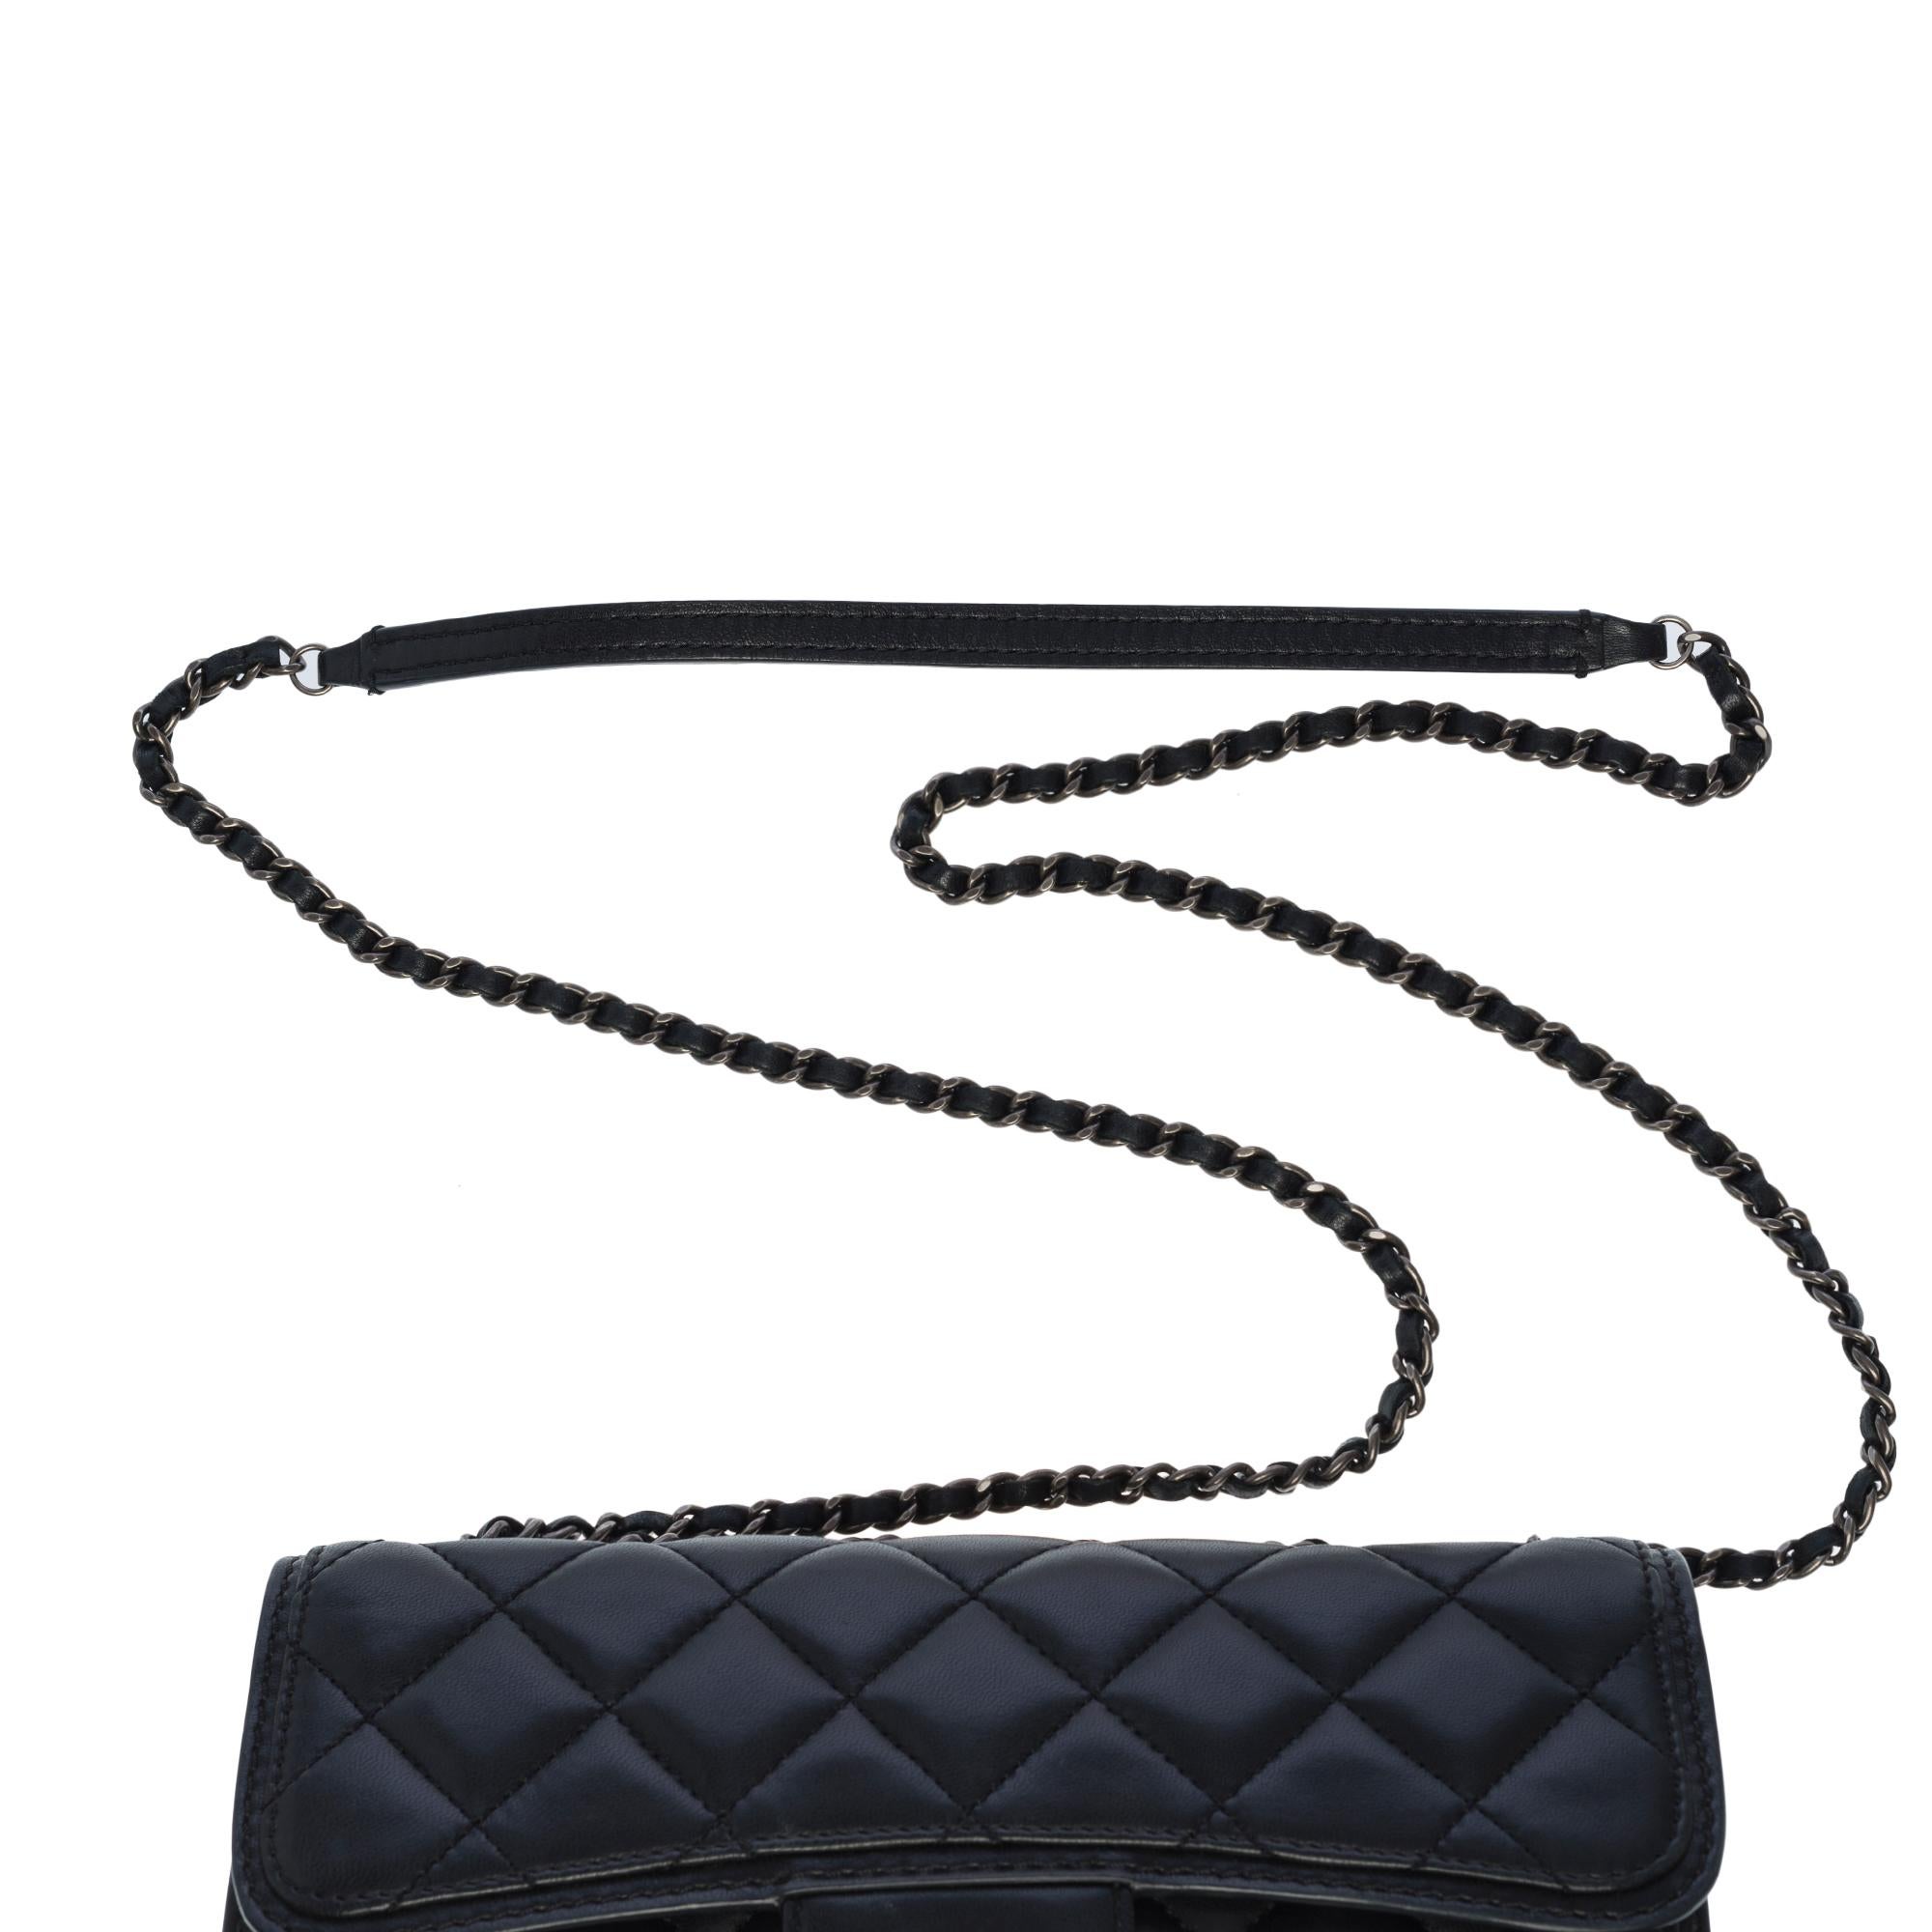 Chanel Classic shoulder flap bag in black quilted lambskin leather, RHW For Sale 5